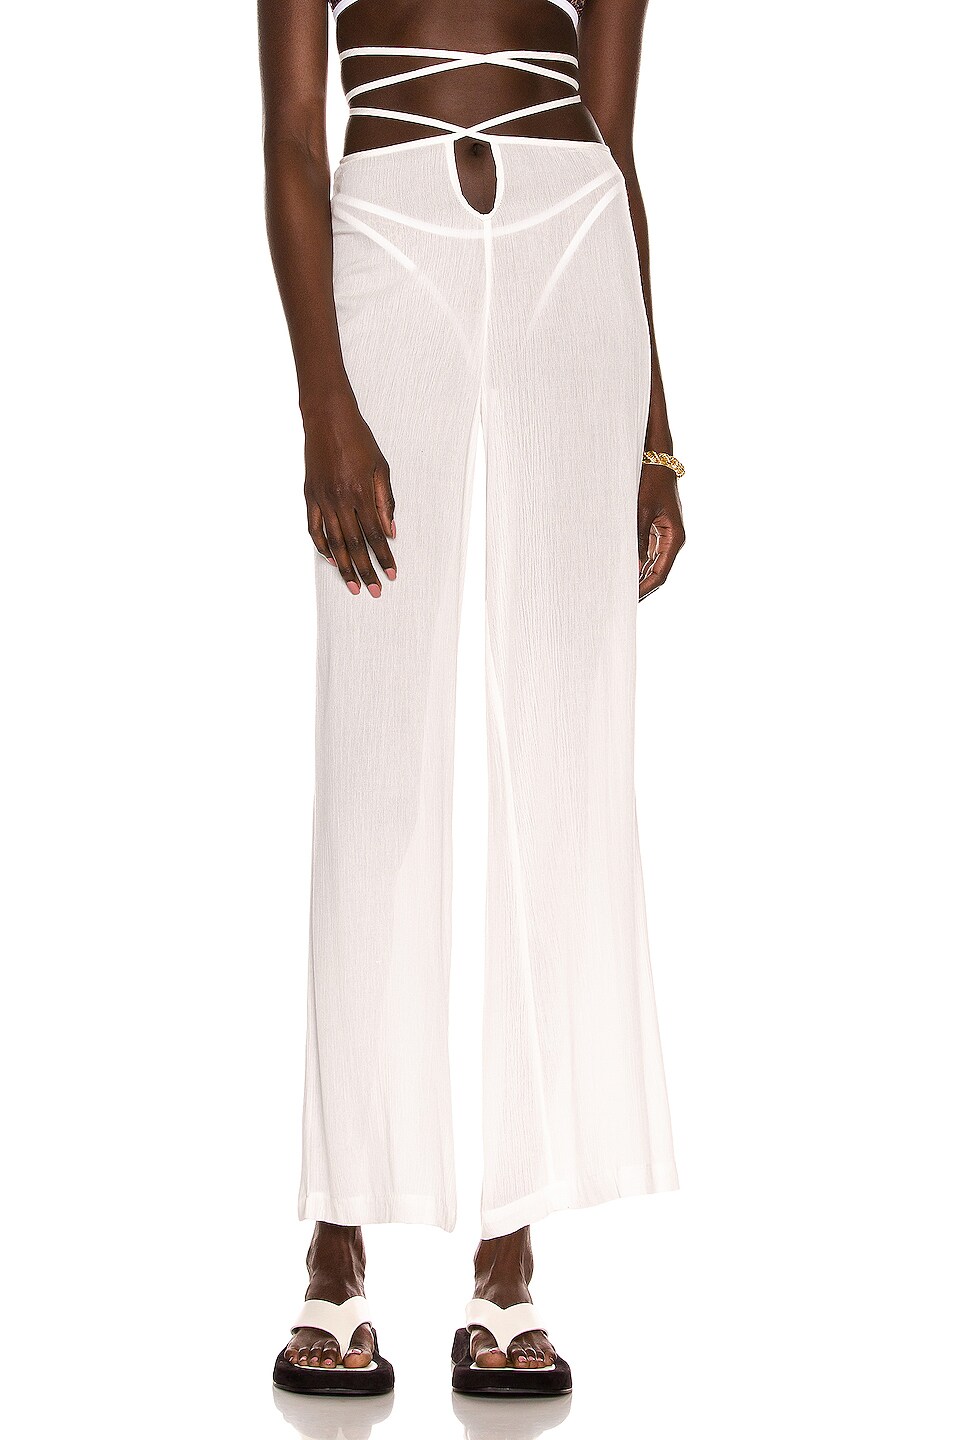 Image 1 of Adam Selman Sport Vacation Pant in White